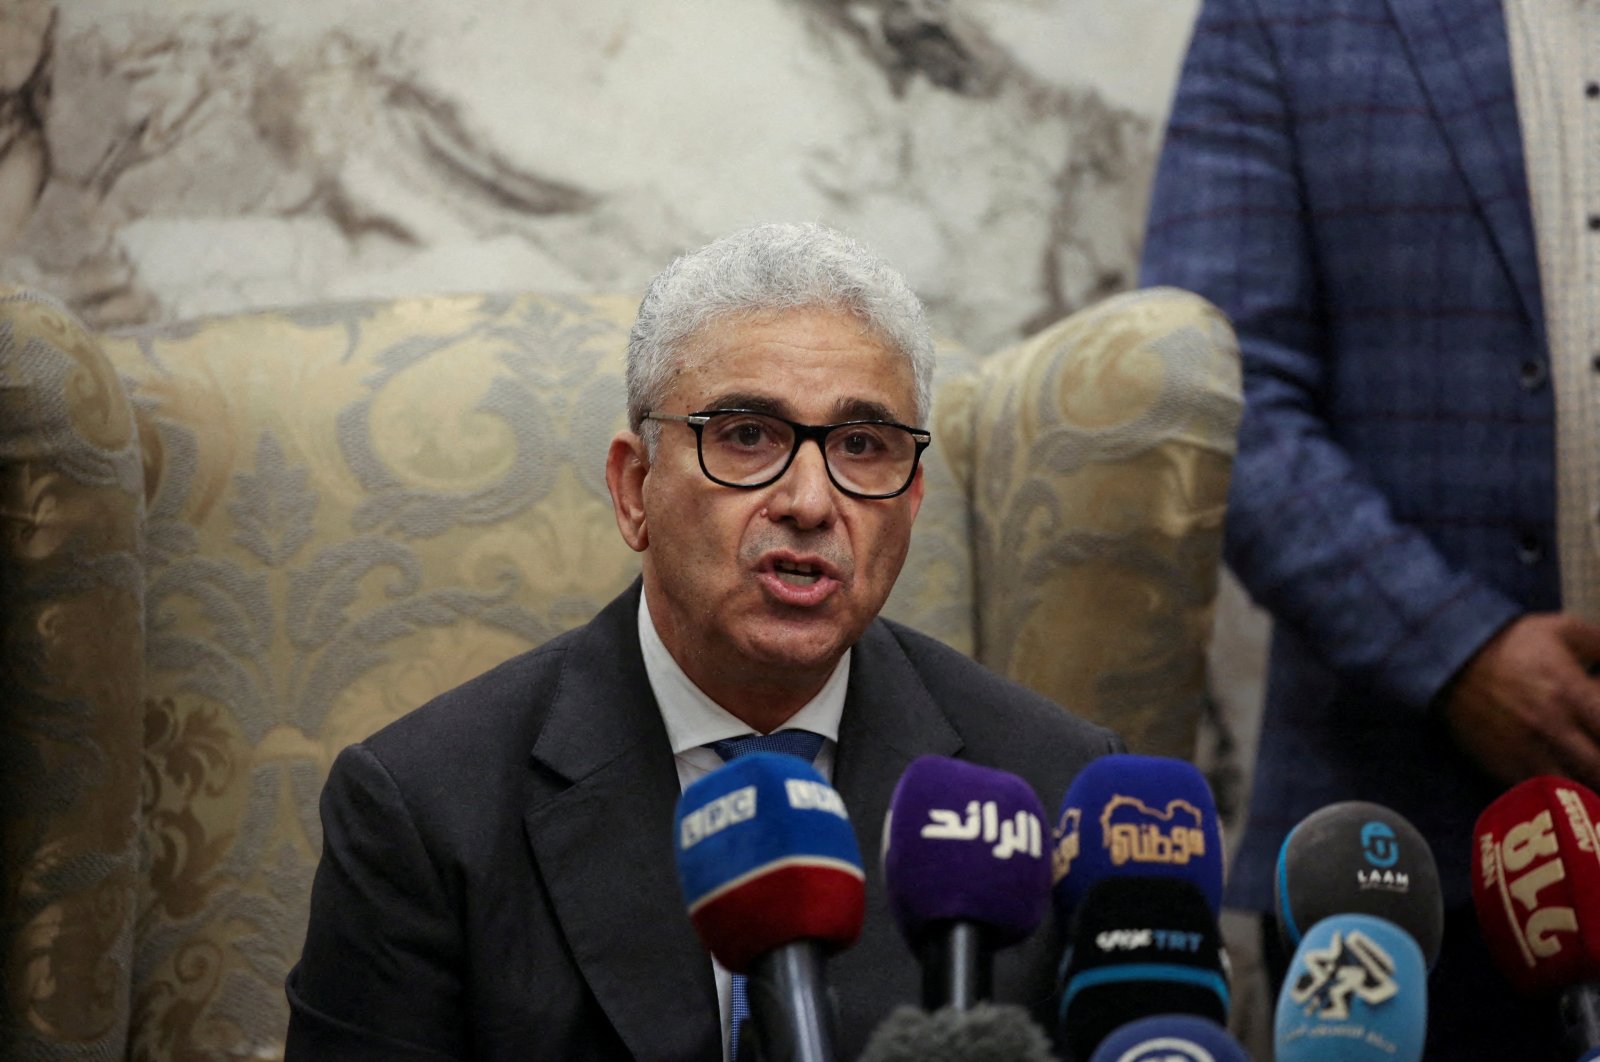 Fathi Bashagha, designated as prime minister by Parliament, delivers a speech at Mitiga International Airport, in Tripoli, Libya, Feb. 10, 2022. (Reuters Photo)